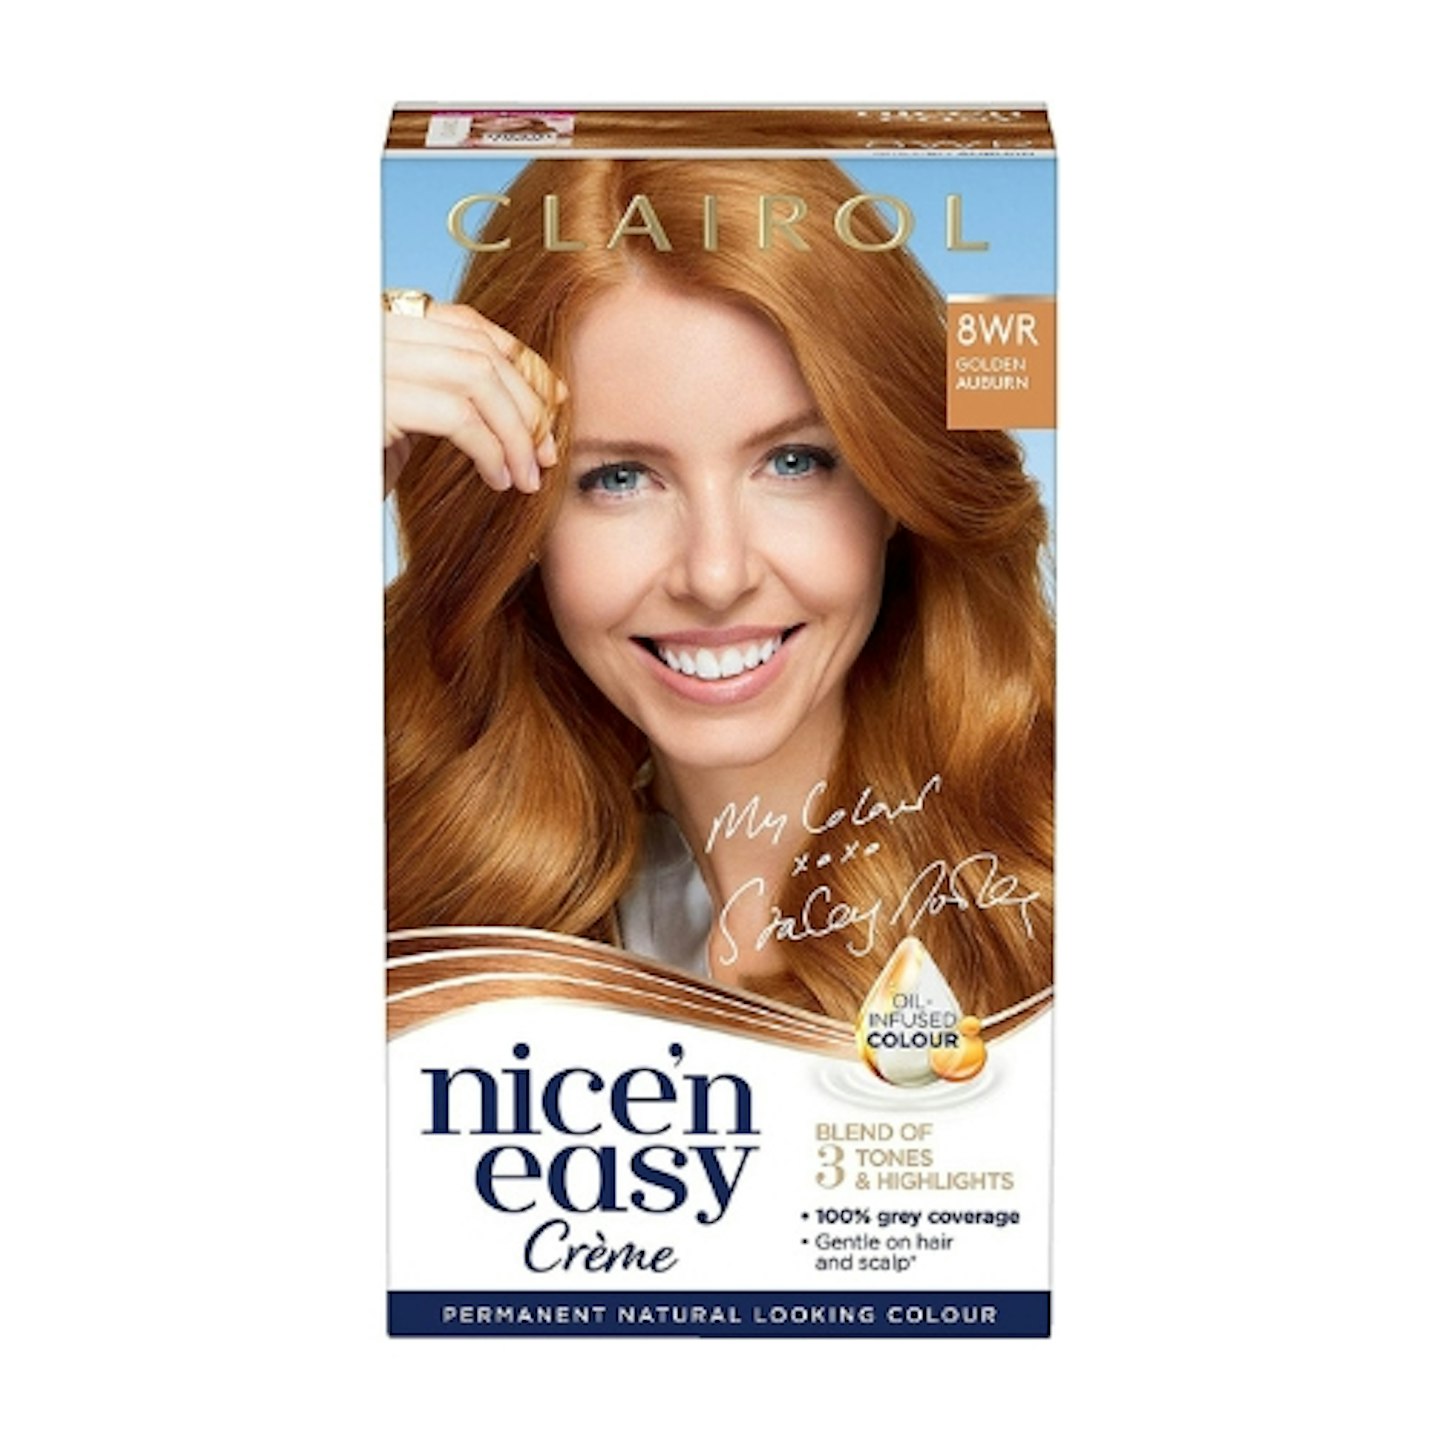 Clairol Nice'n Easy Crème, Natural Looking Oil Infused Permanent Hair Dye, 8WR Golden Auburn